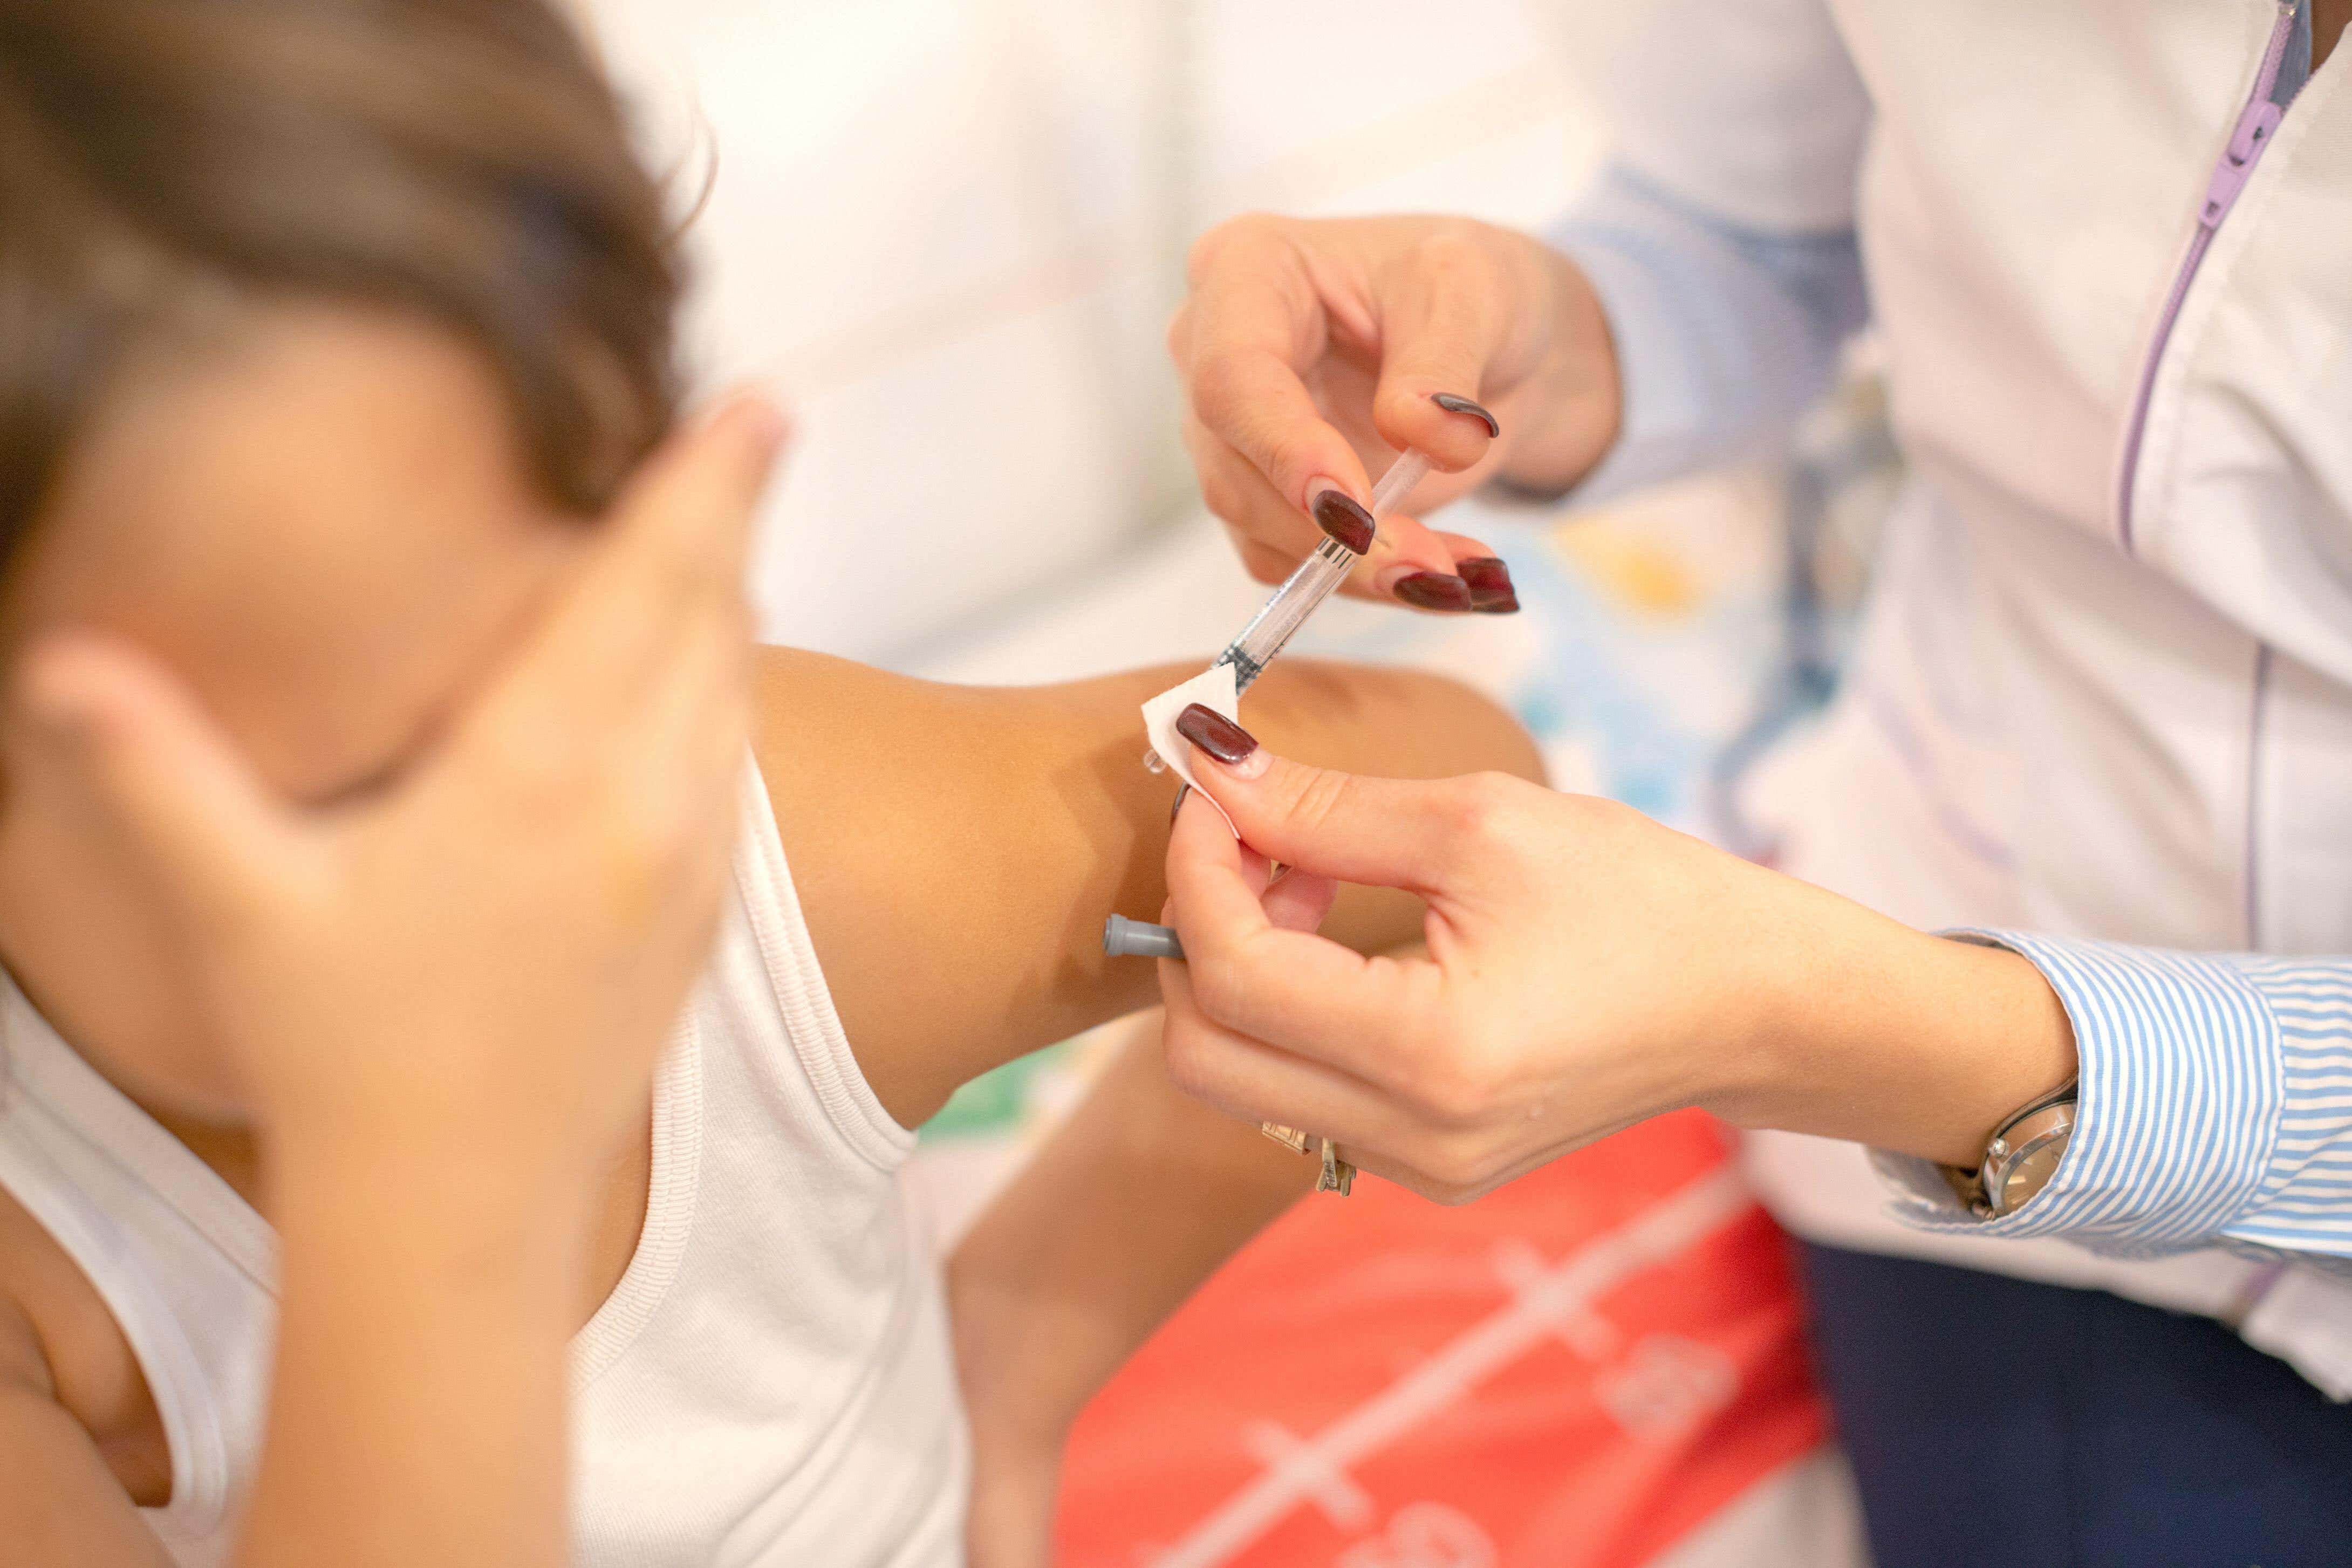 Tips to make needle-phobic children relax during vaccinations (Alamy/PA)